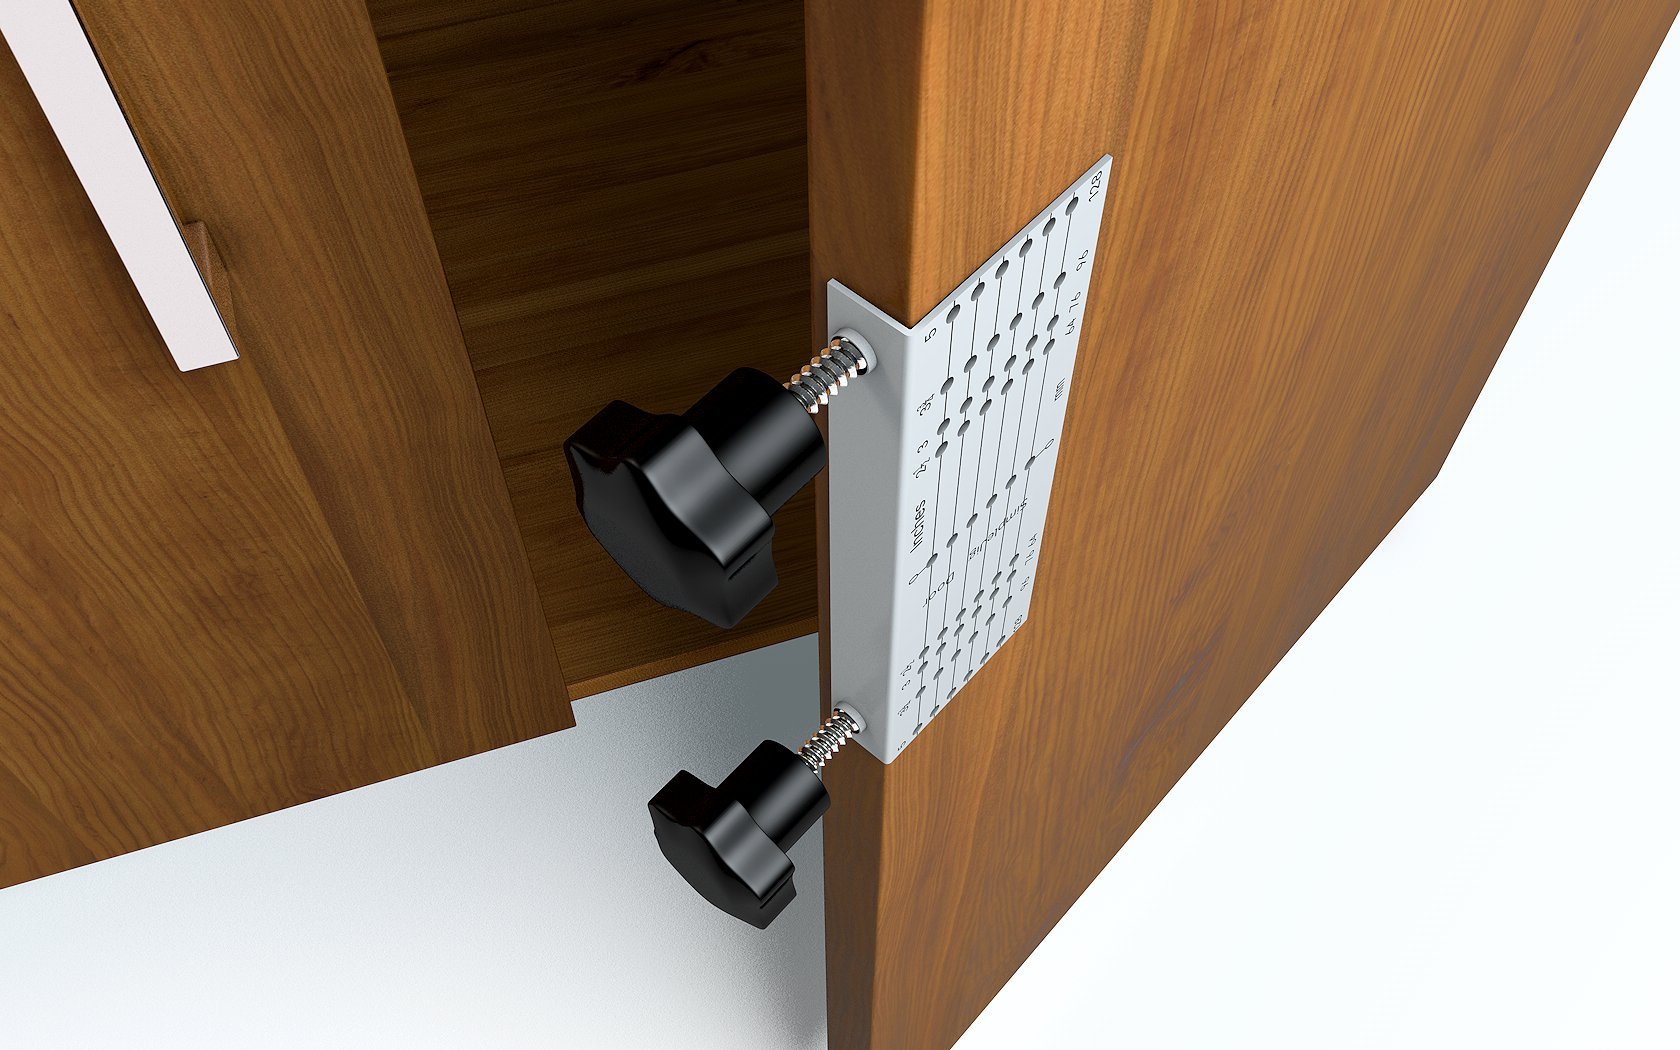 How Do I Make A Template Drill Hole For Cabinet Pulls Interior Magazine Leading Decoration